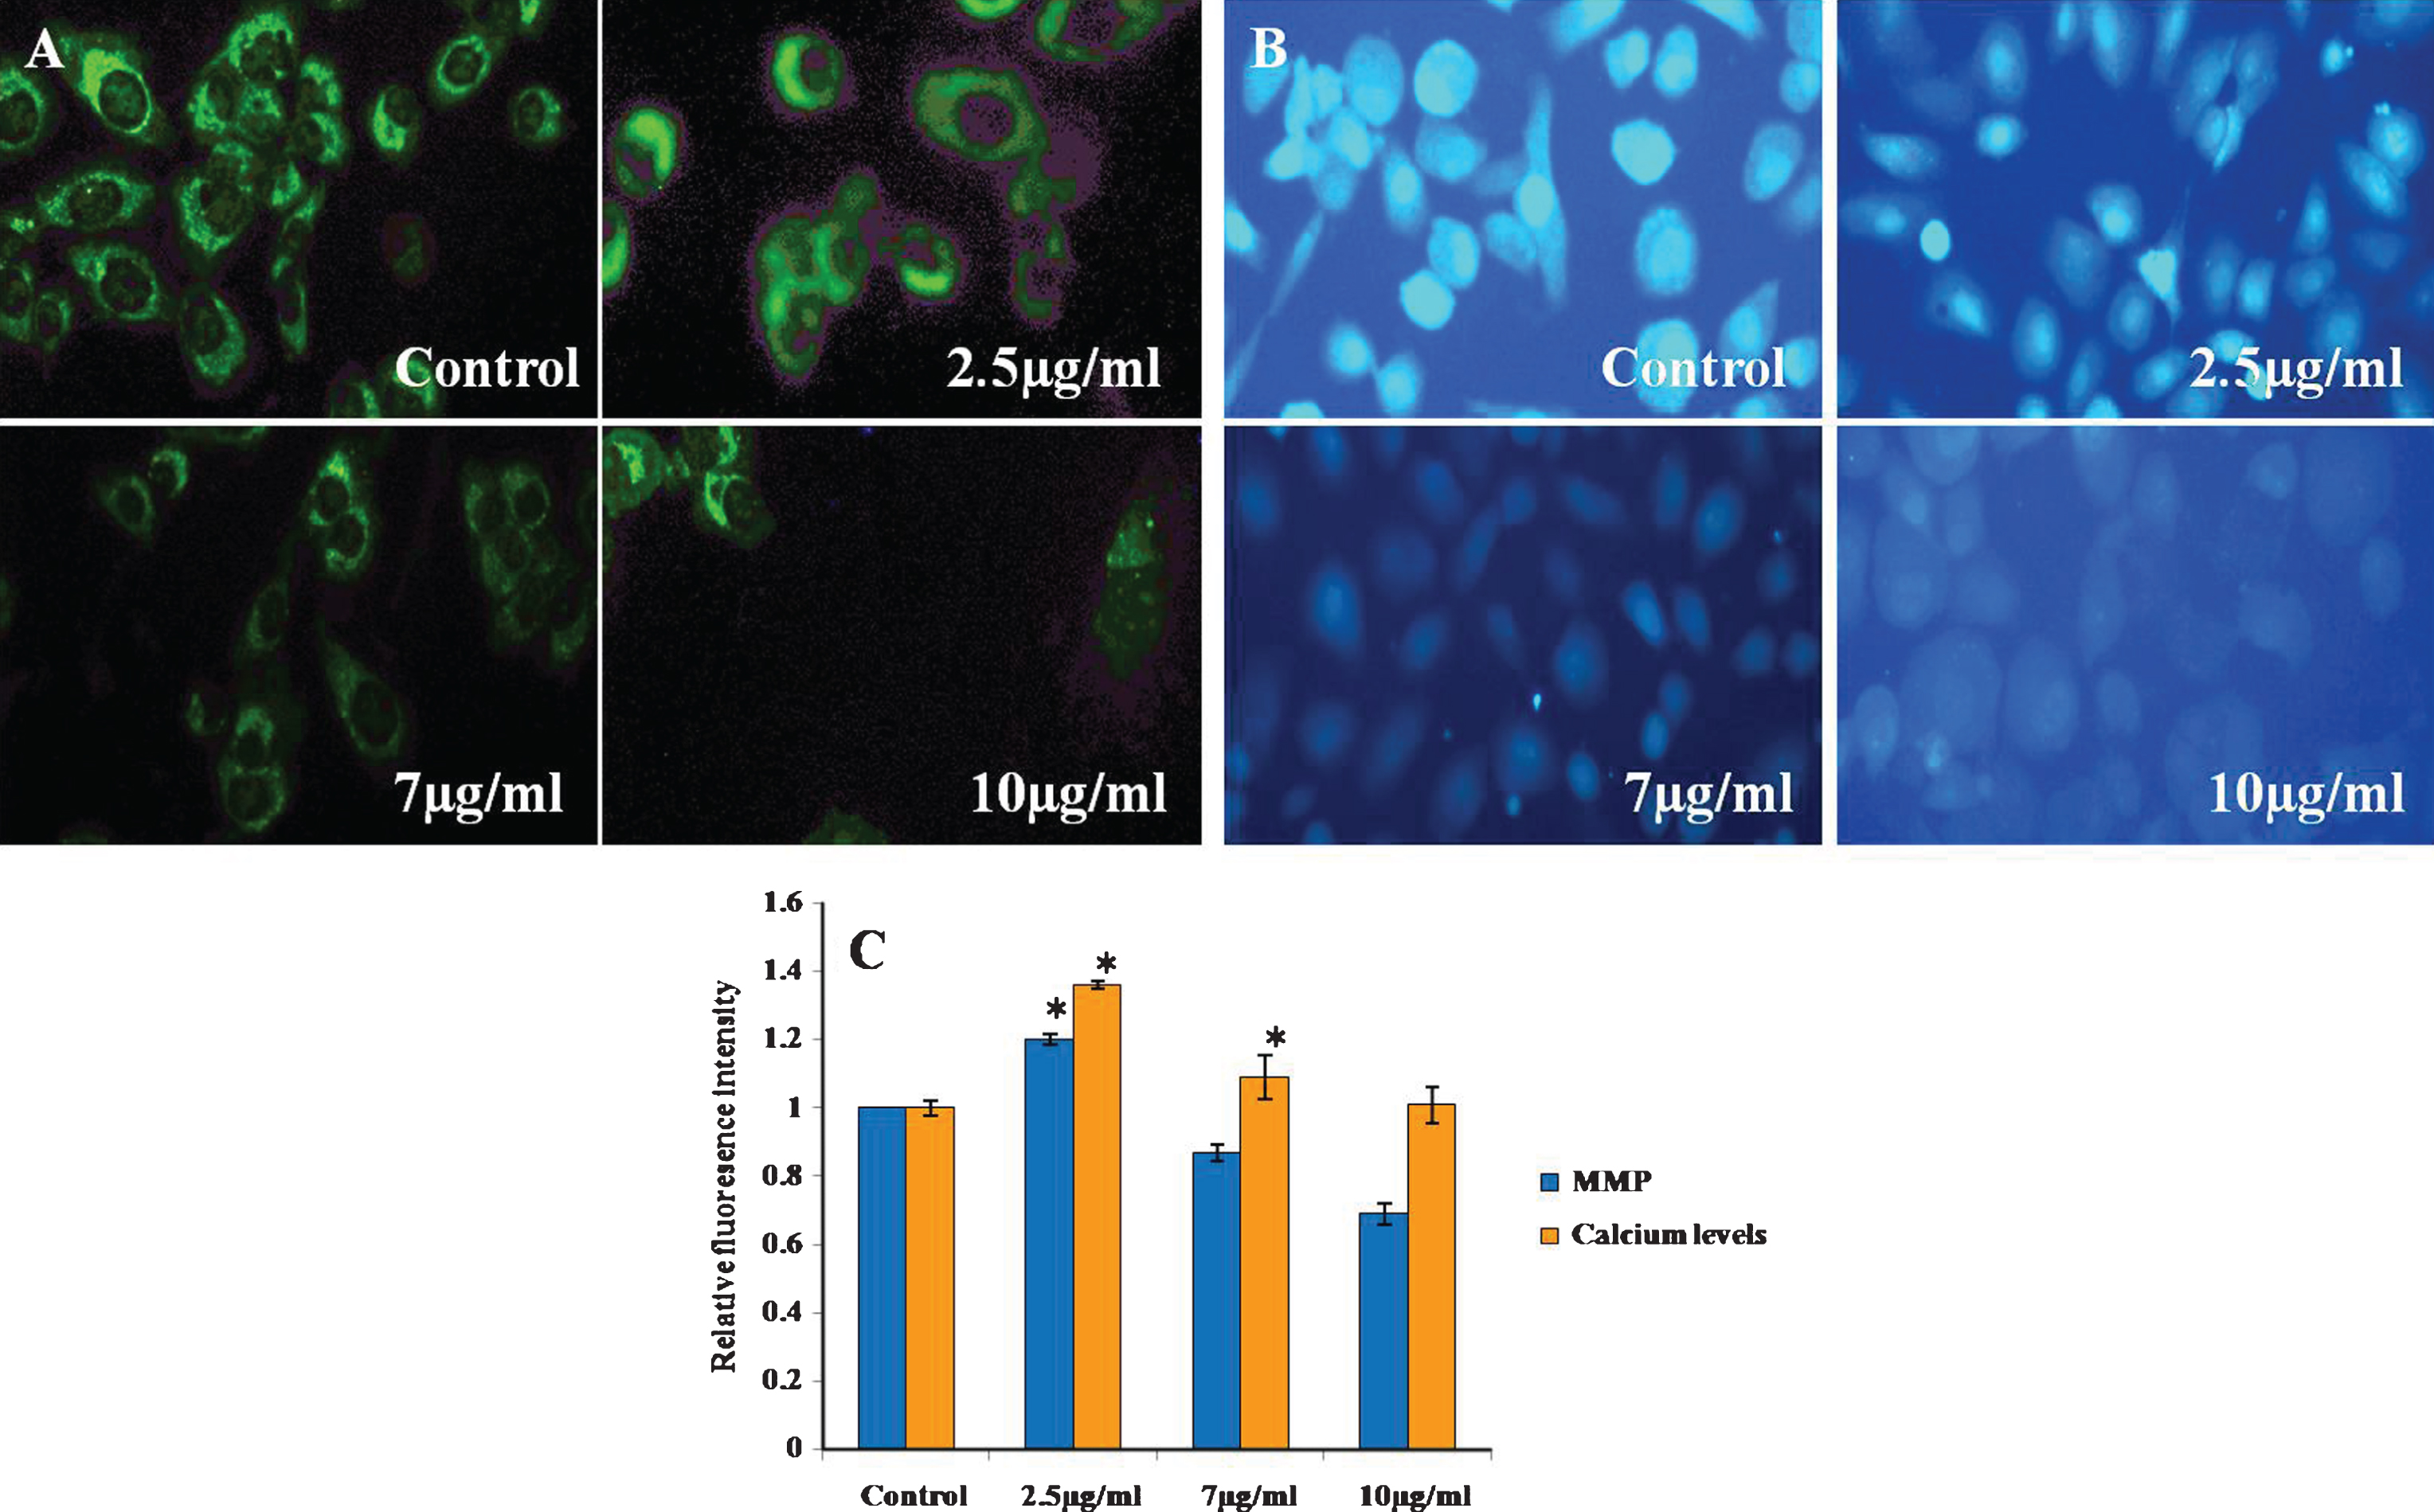 Calcium handling and MMP of CKf treated DU-145 cells. A) MMP B) Fura-2-AM staining, C: Relative fluorescence intensity of Rhodamine-123 and Fura-2-AM stained cells. Values are expressed as Mean±SD of three independent experiments. *Statistically significant compared to control (p < 0.05).